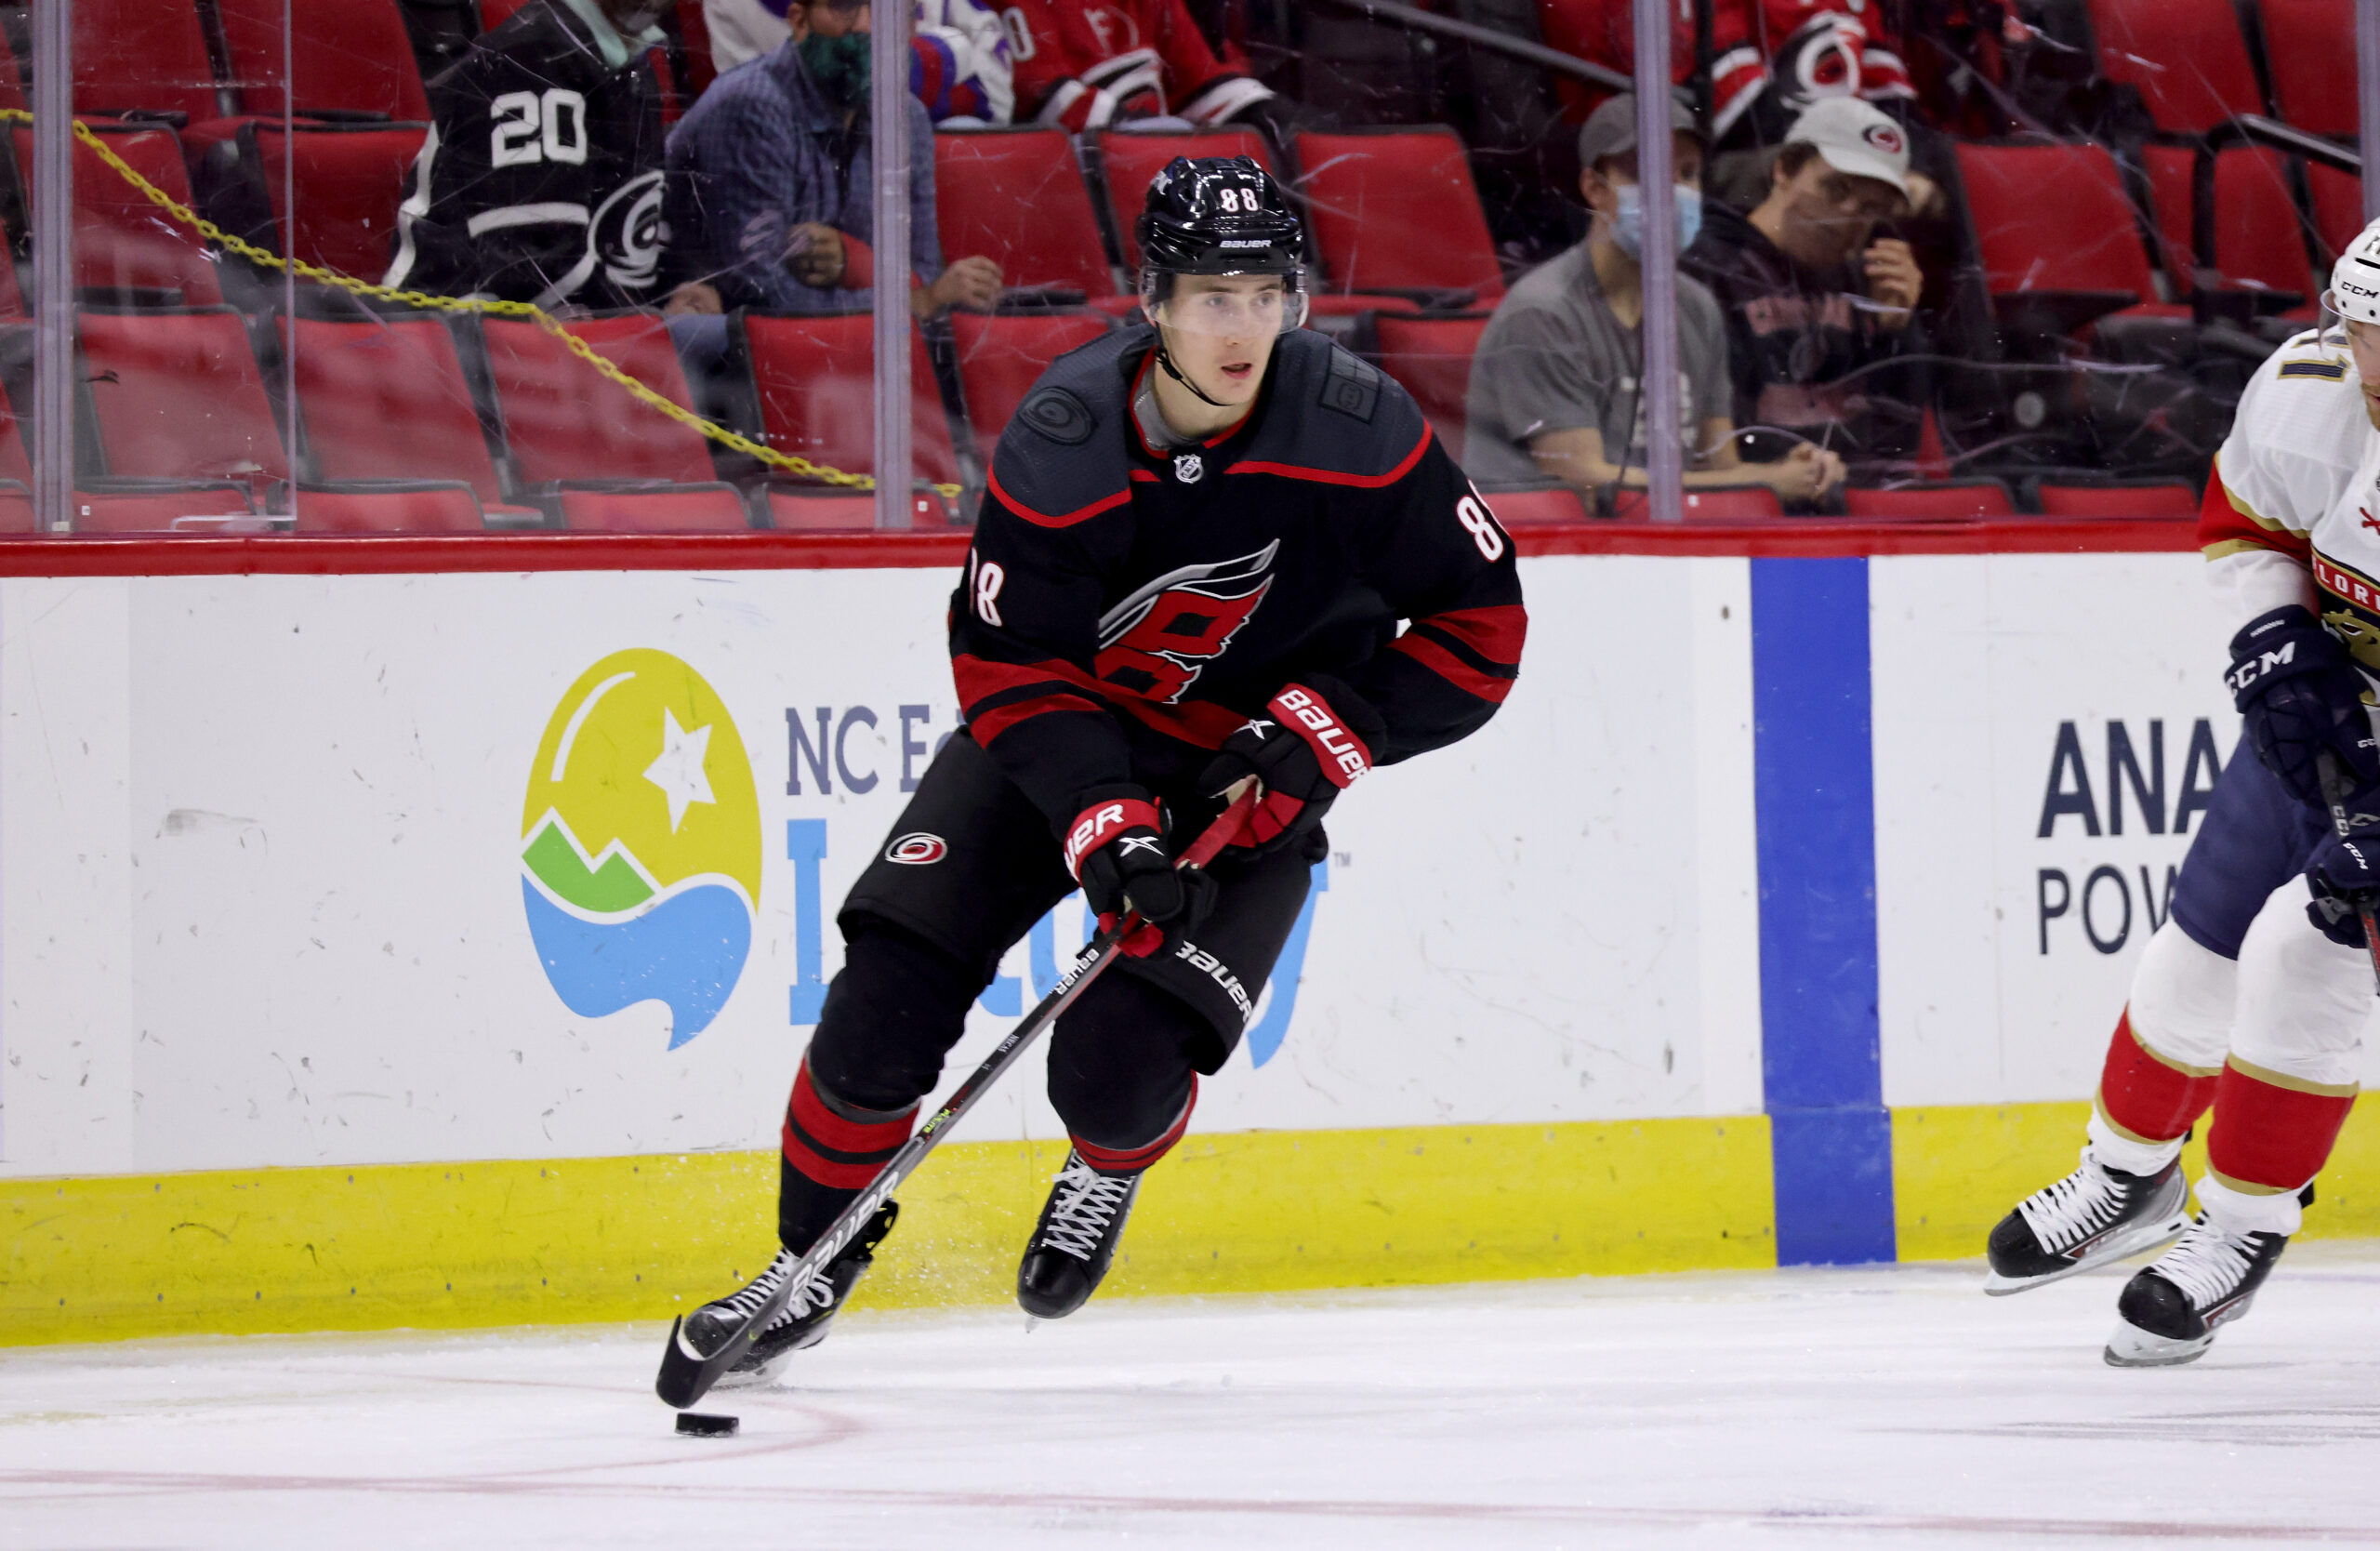 The dynamic force of Andrei Svechnikov - by dylan